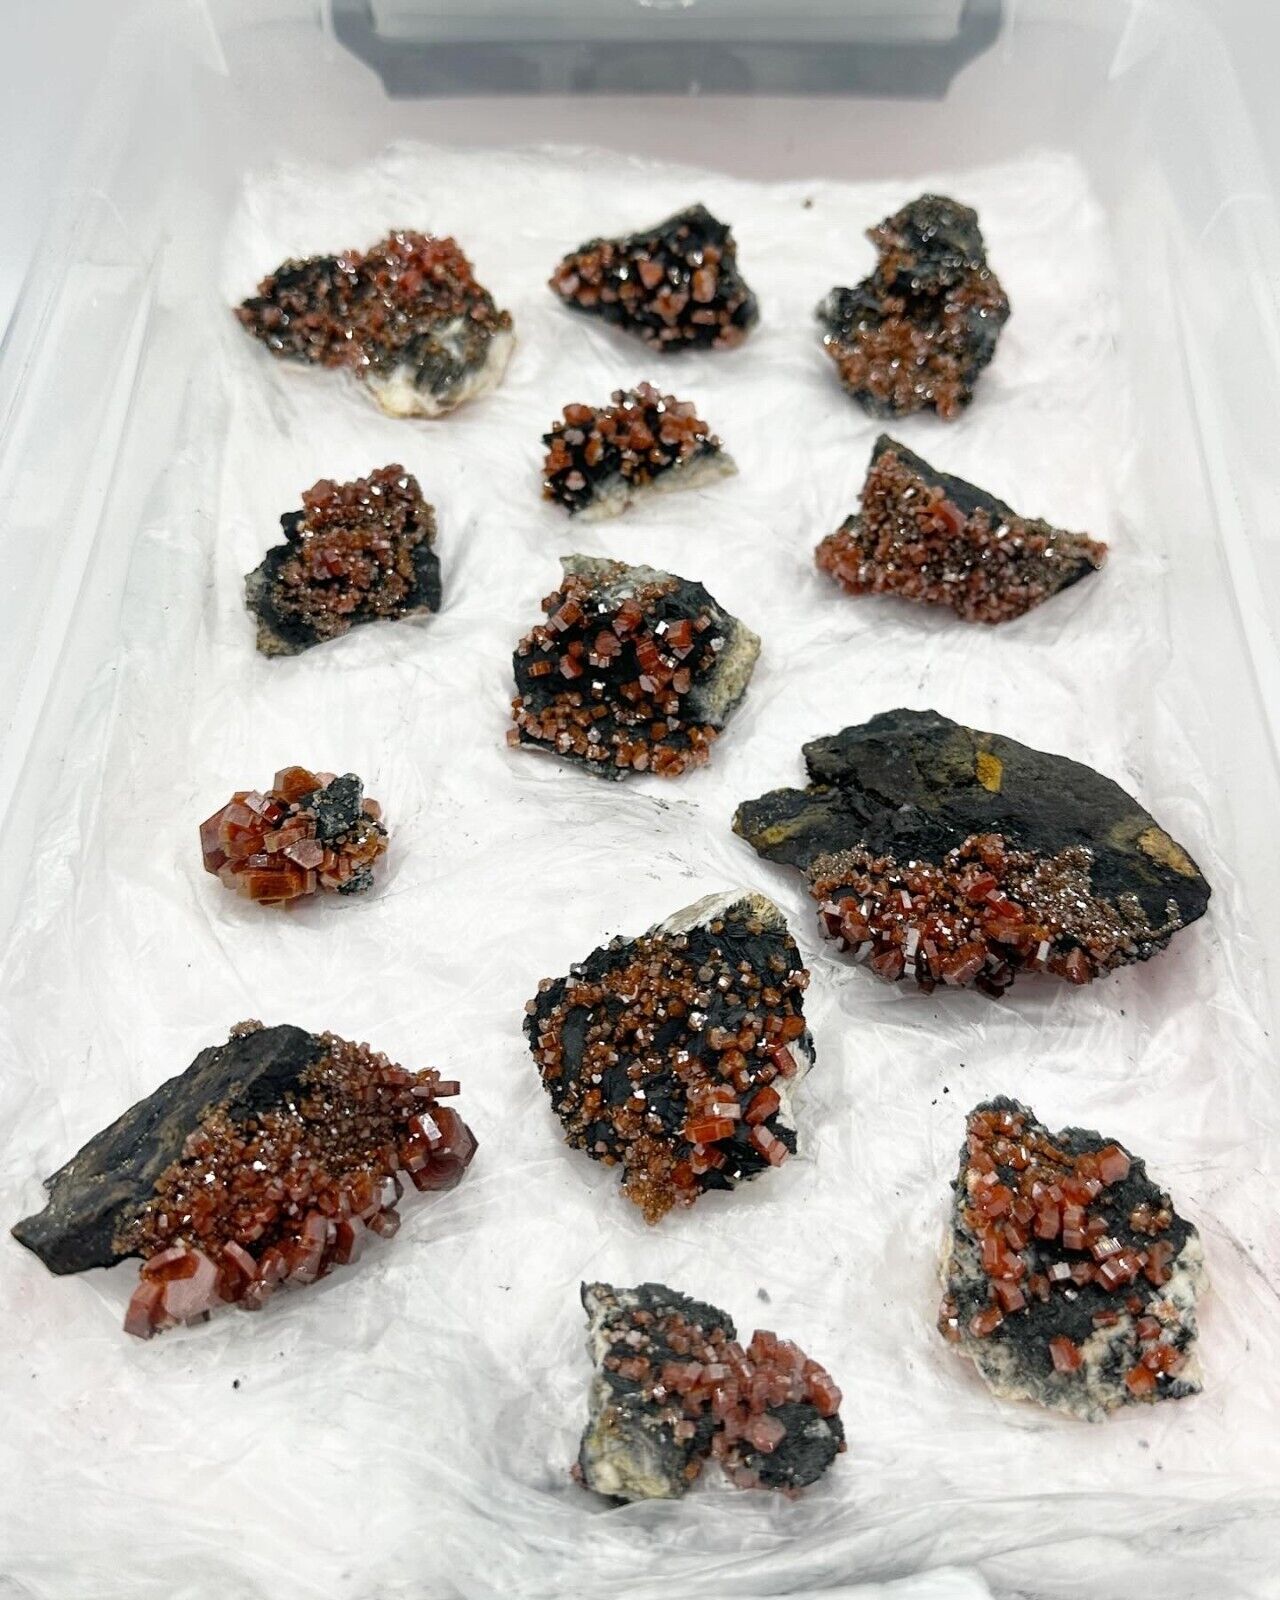 Set of 13 Natural Vanadinite Crystals from Morocco, 414grams Mineral Specimens